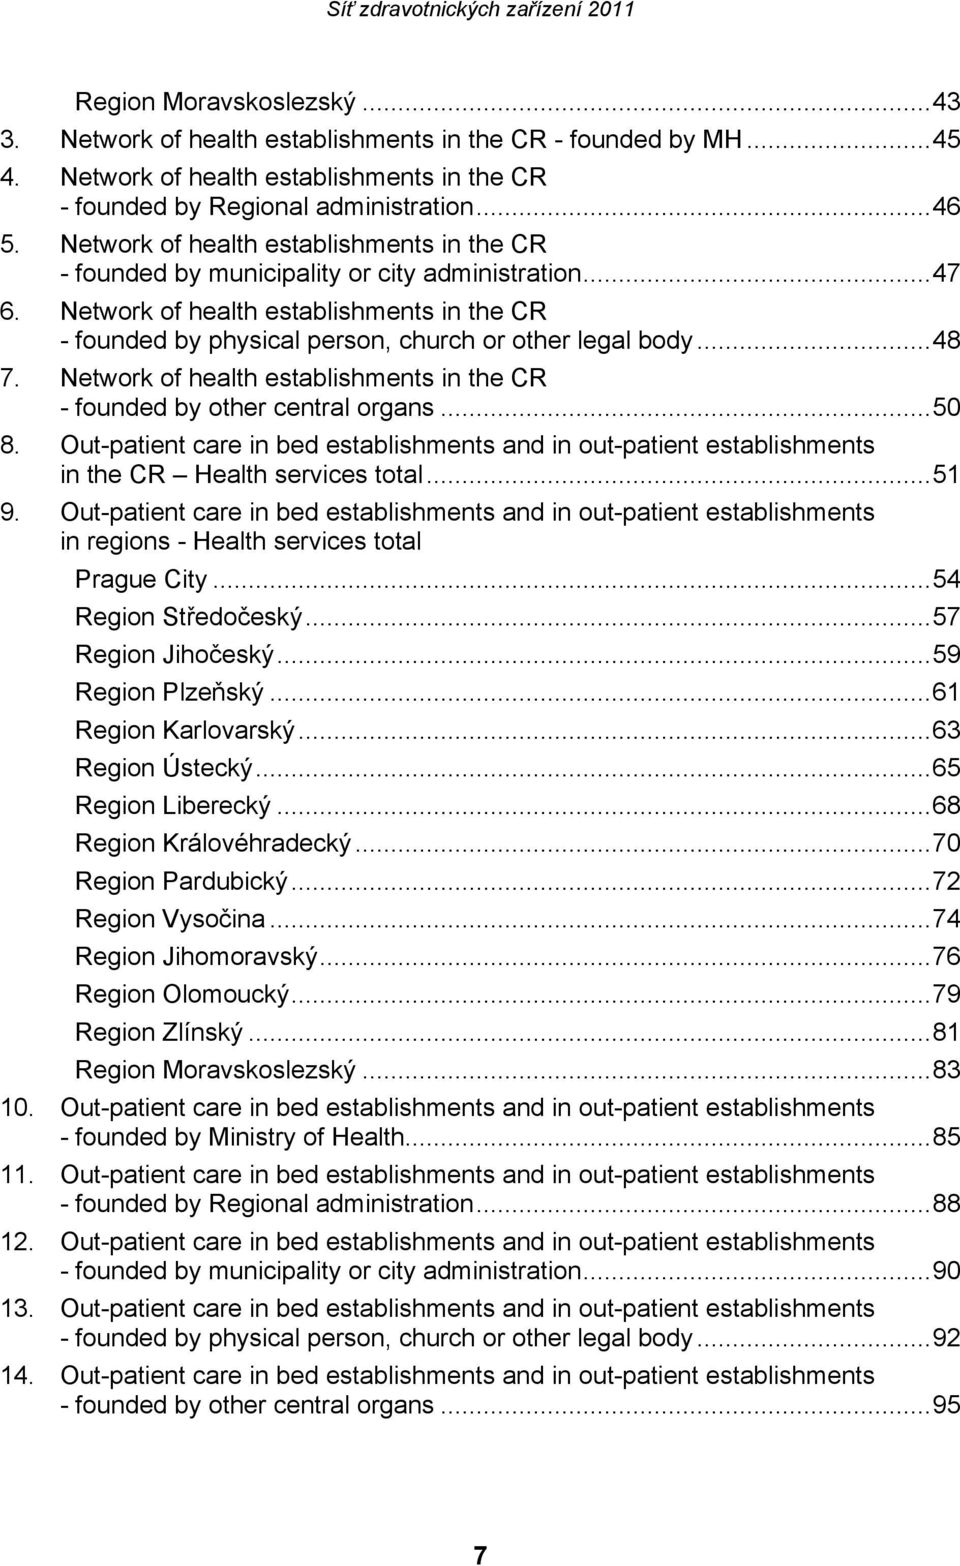 ..48 7. Network of health establishments in the CR - founded by other central organs...50 8. Out-patient care in bed establishments and in out-patient establishments in the CR Health services total.